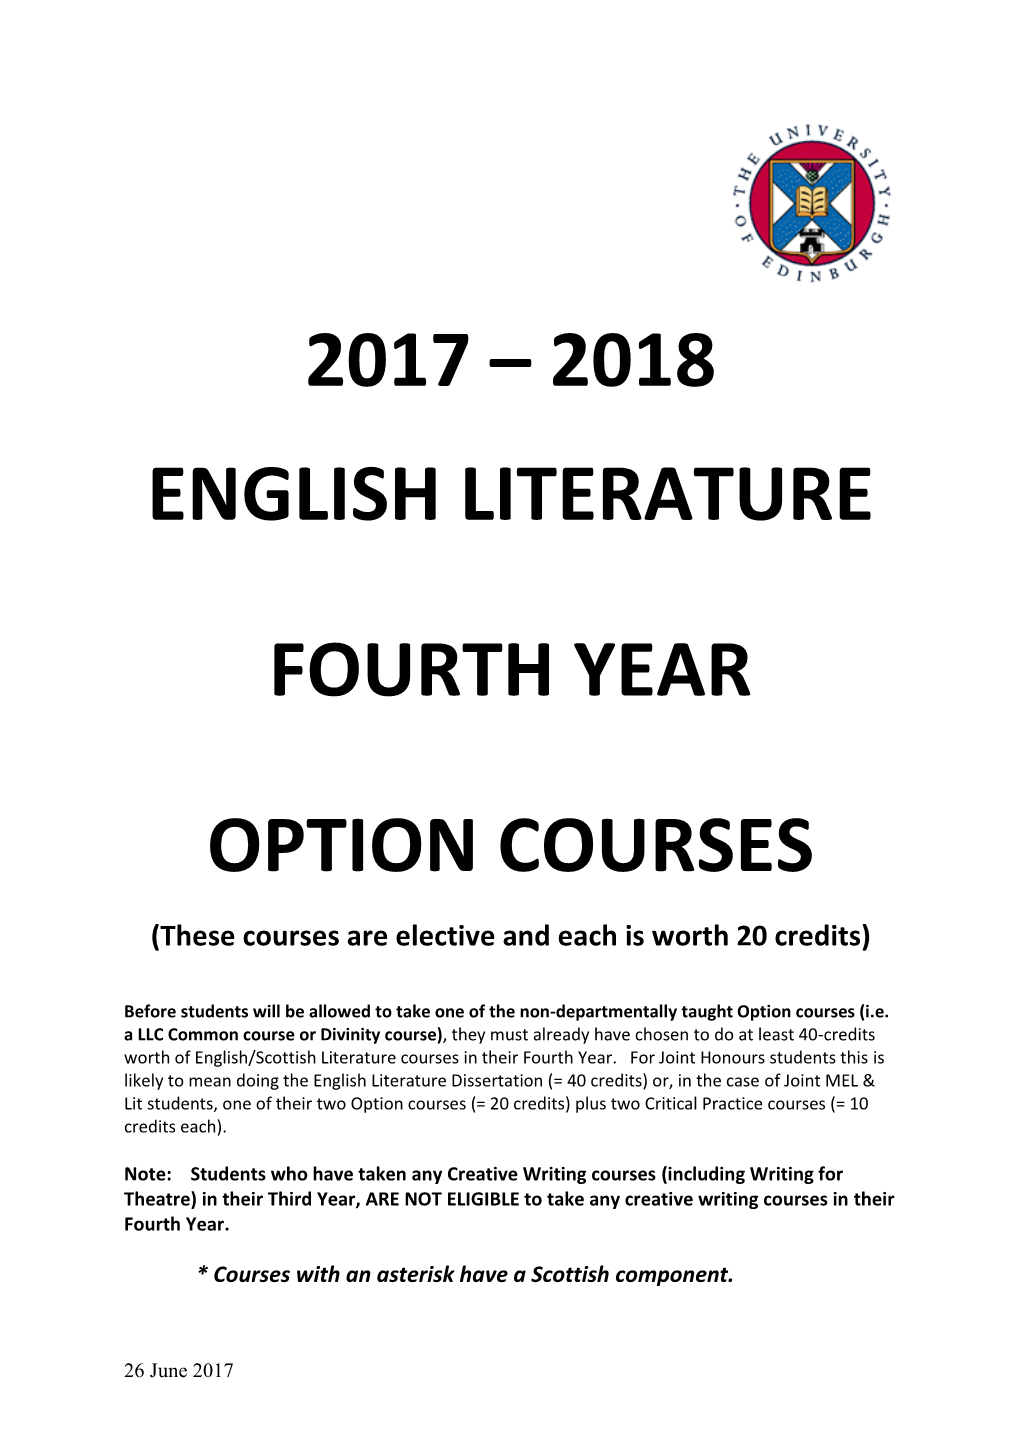 2017 – 2018 English Literature Fourth Year Option Courses